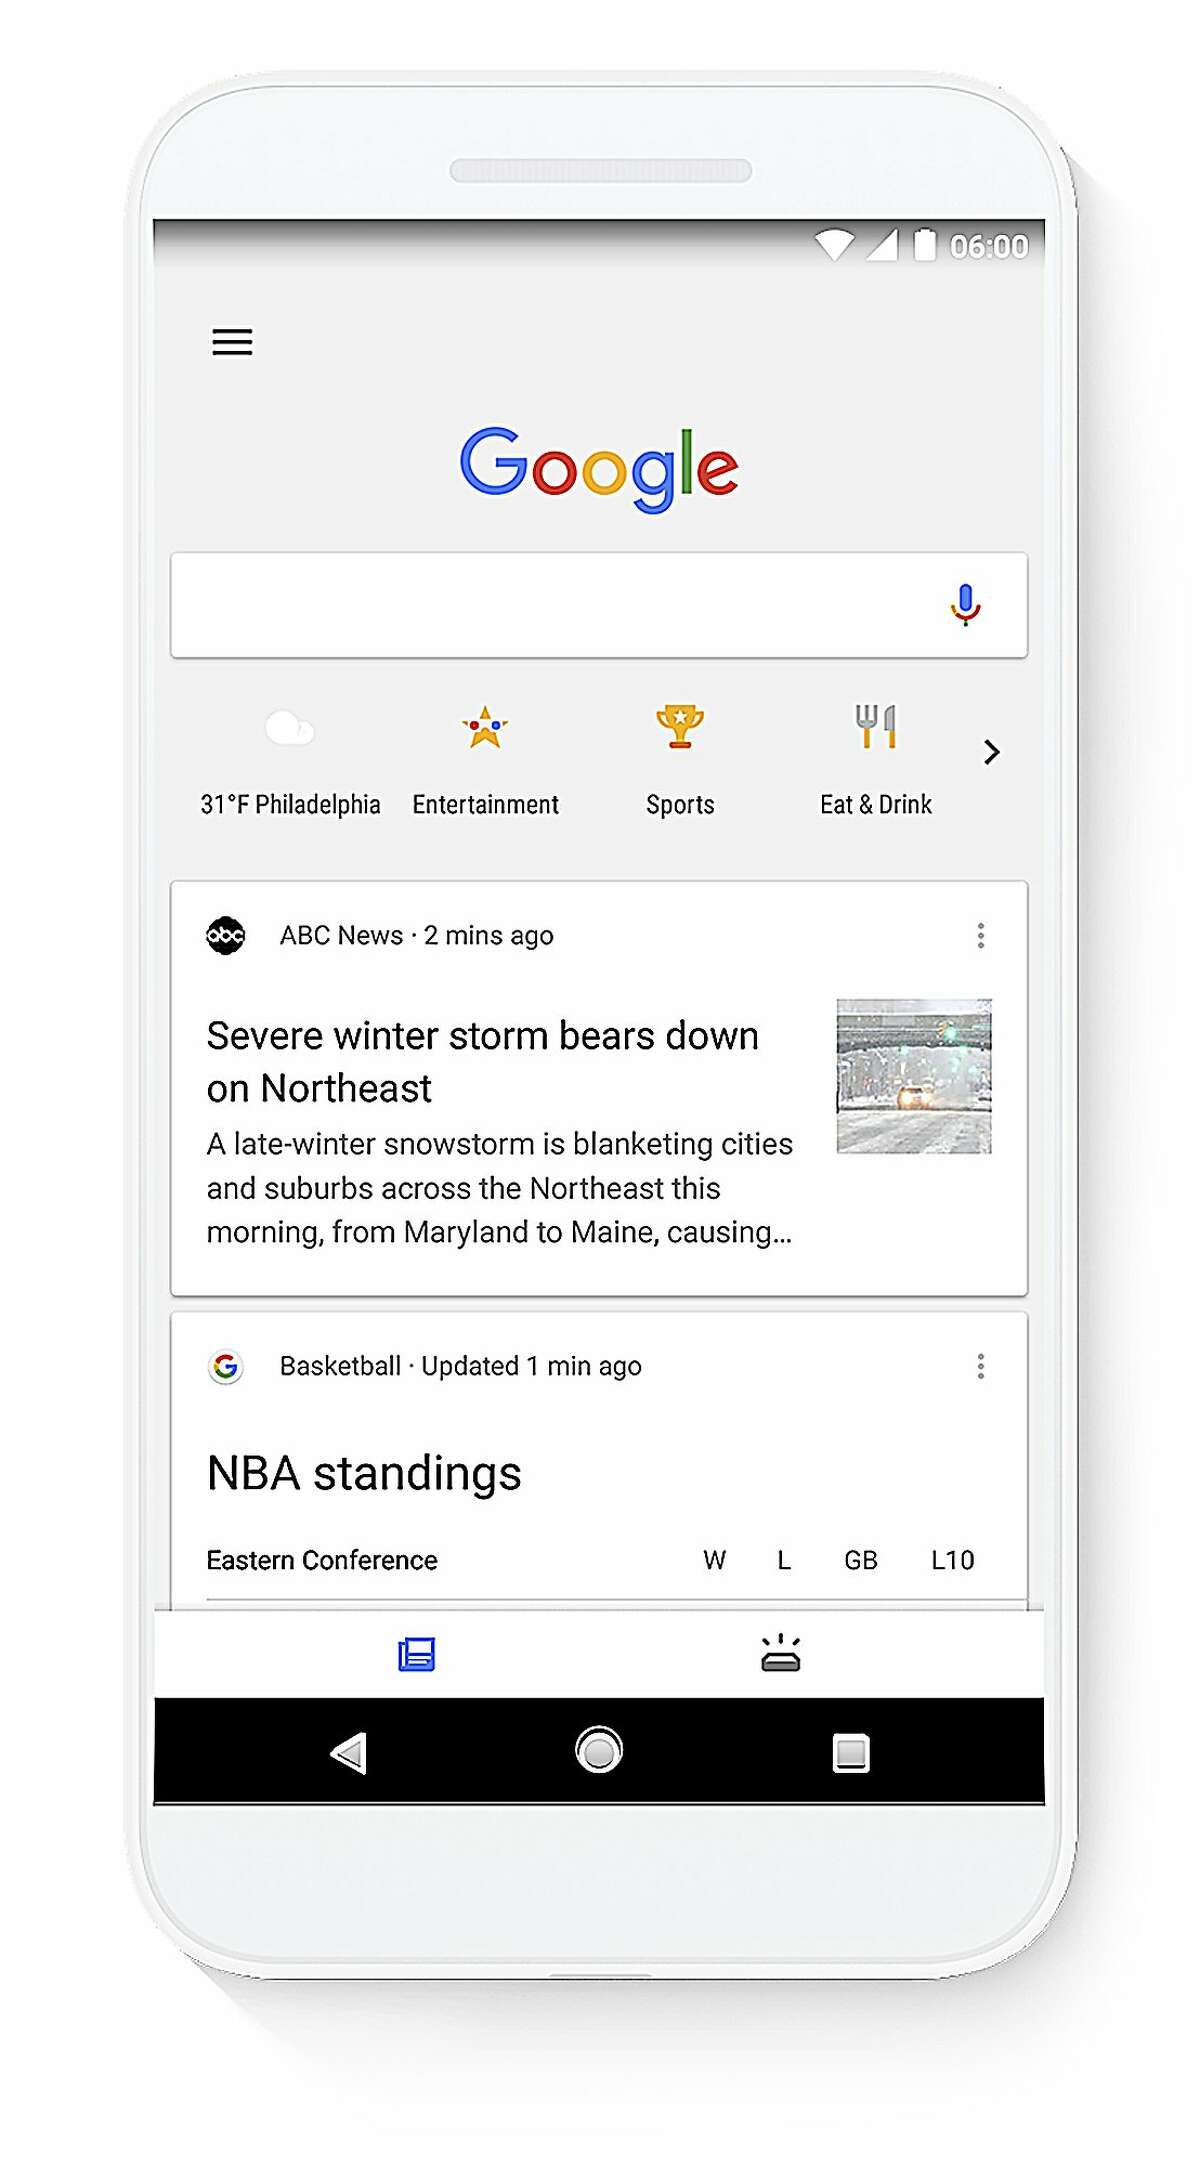 This image provided by Google shows a screen grab of a smartphone demonstrating the use of a new search feature by Google called Shortcuts. Shortcuts are a new row of icons that appear below the Google search box that can be tapped so people can see the latest weather in the area, movie times, suggestions on places to eat or scores of their latest teams without typing anything into the search box. (Google via AP)